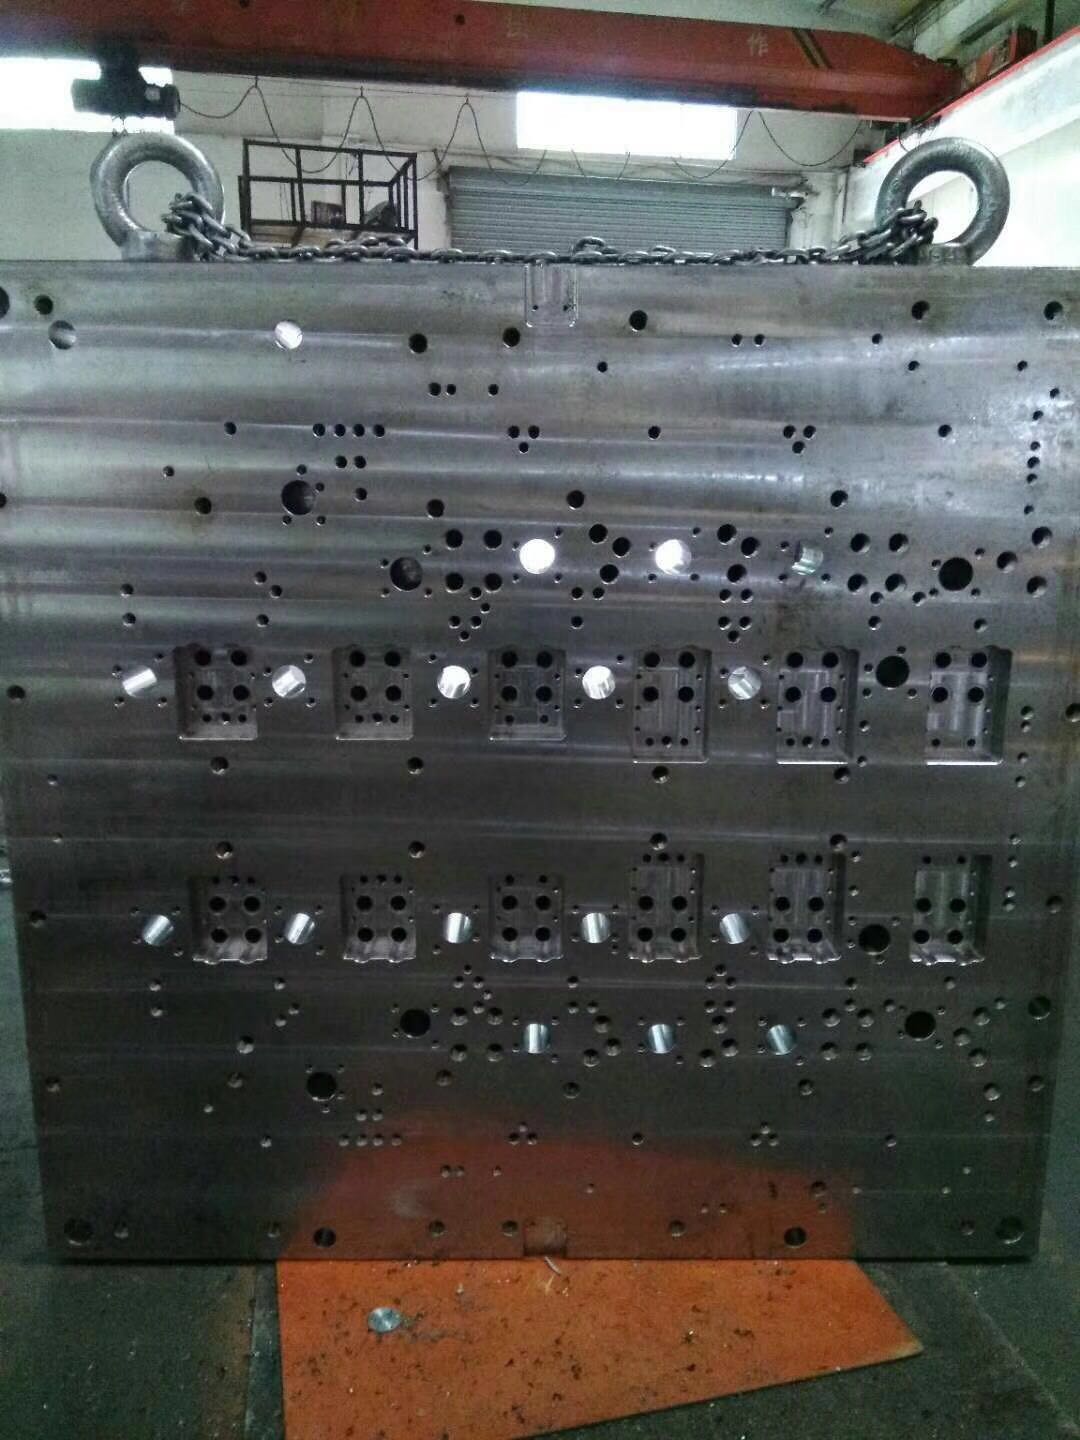 What materials are usually used to make table injection mold?